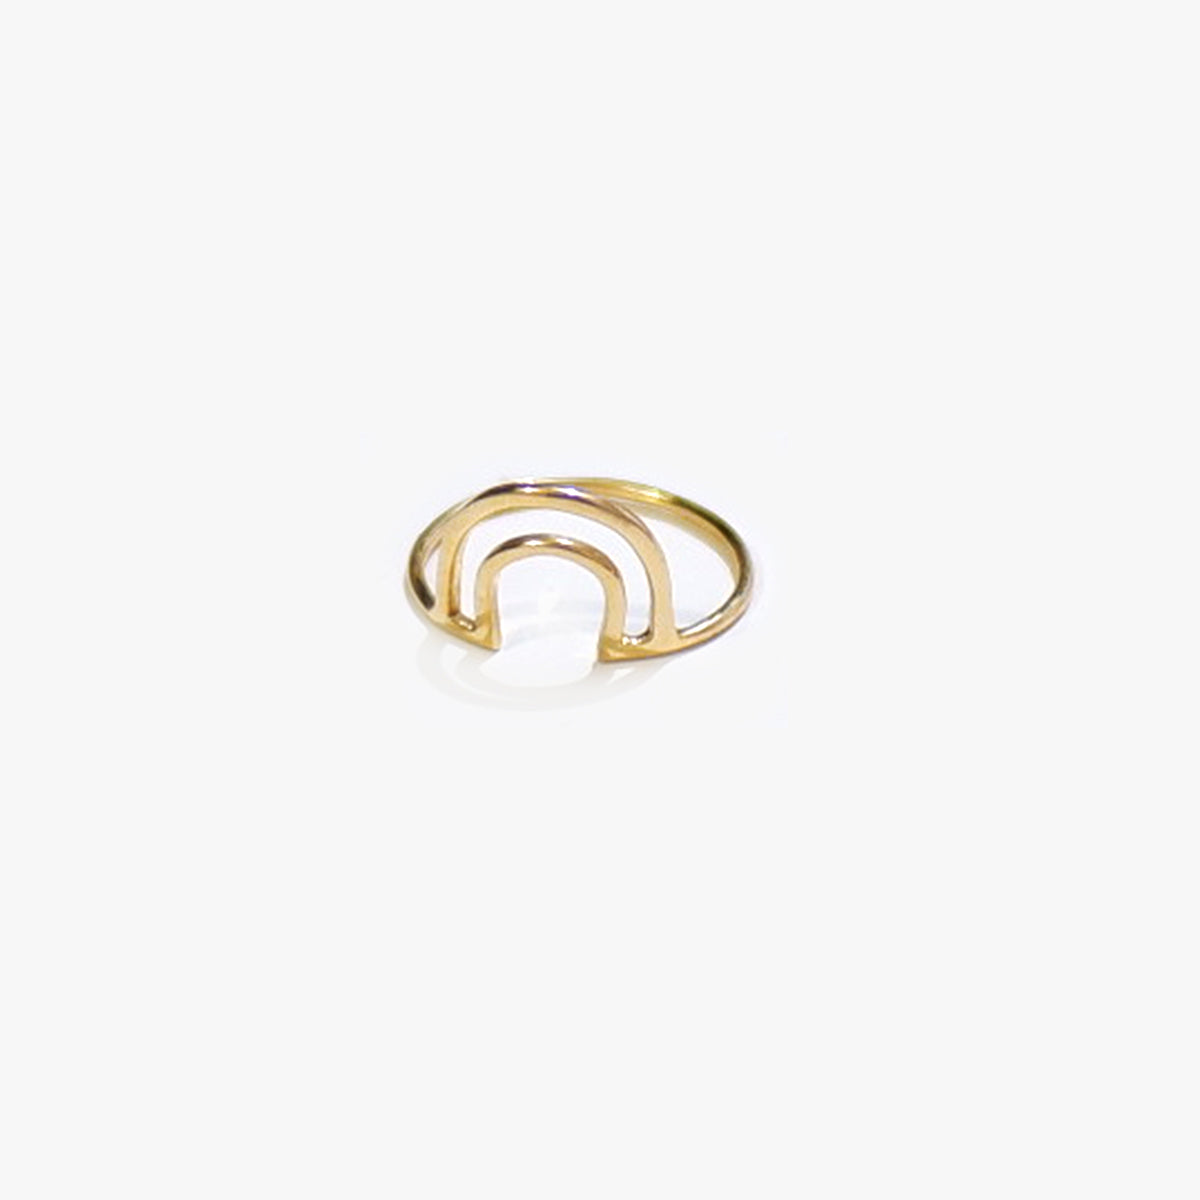 The Rainbow Ring in Solid Gold